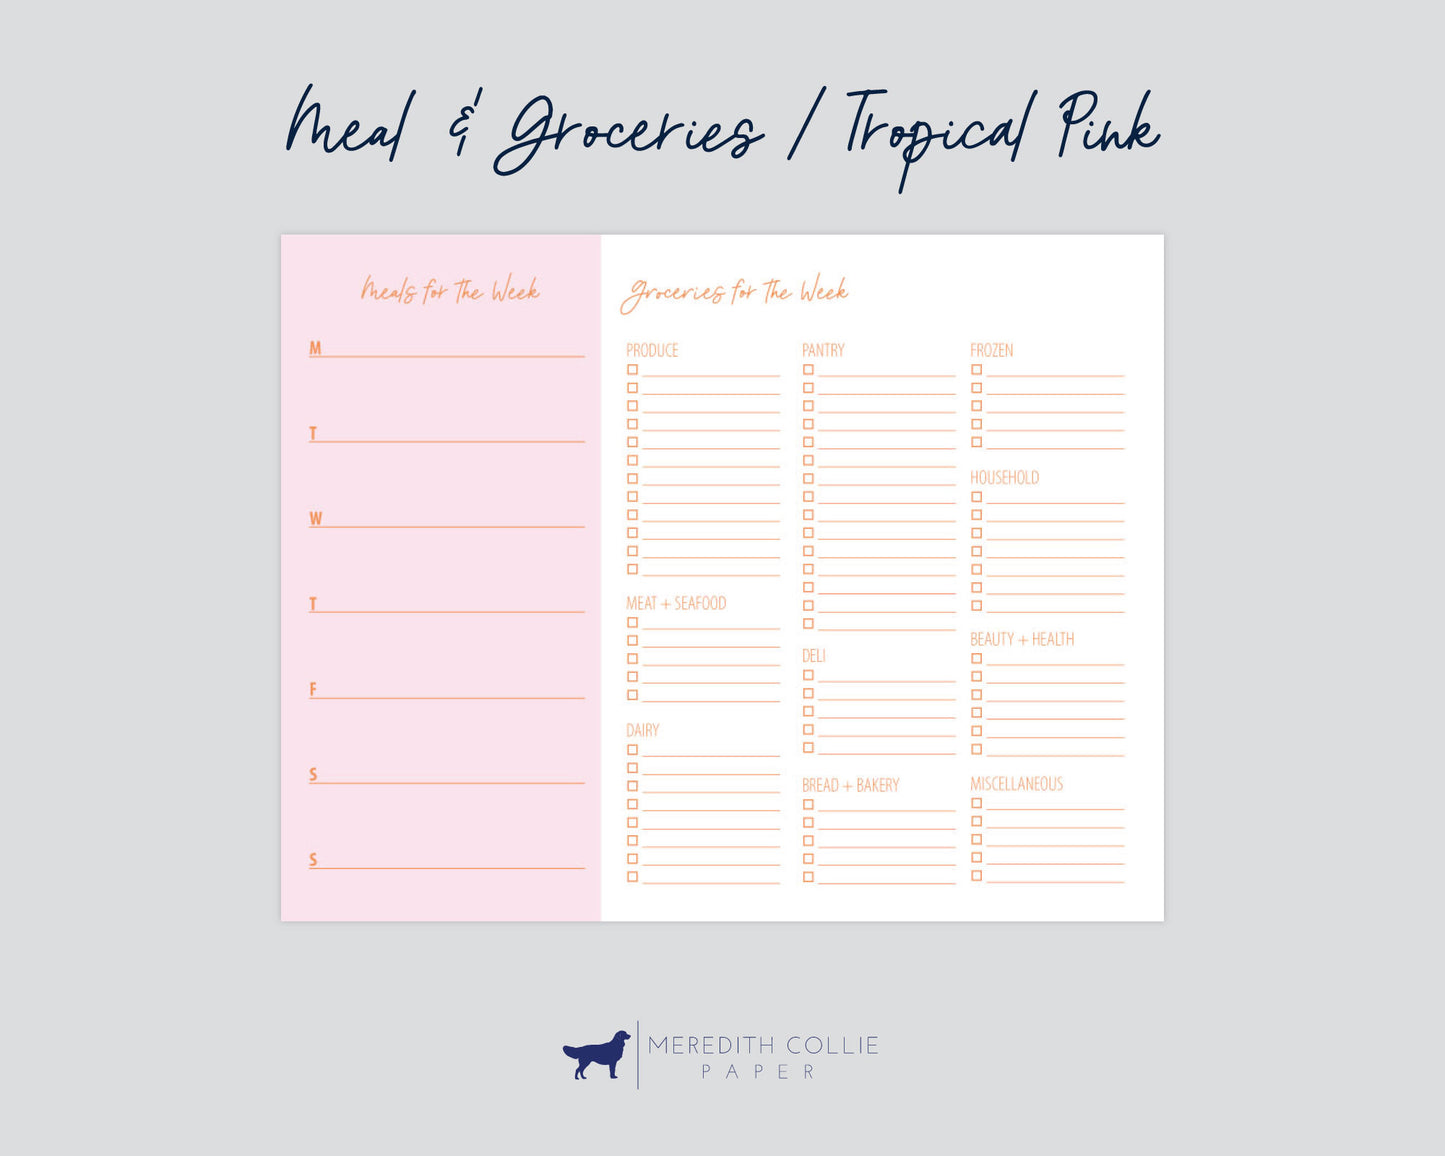 meals and groceries for the week planner, tropical pink, Meredith Collie paper